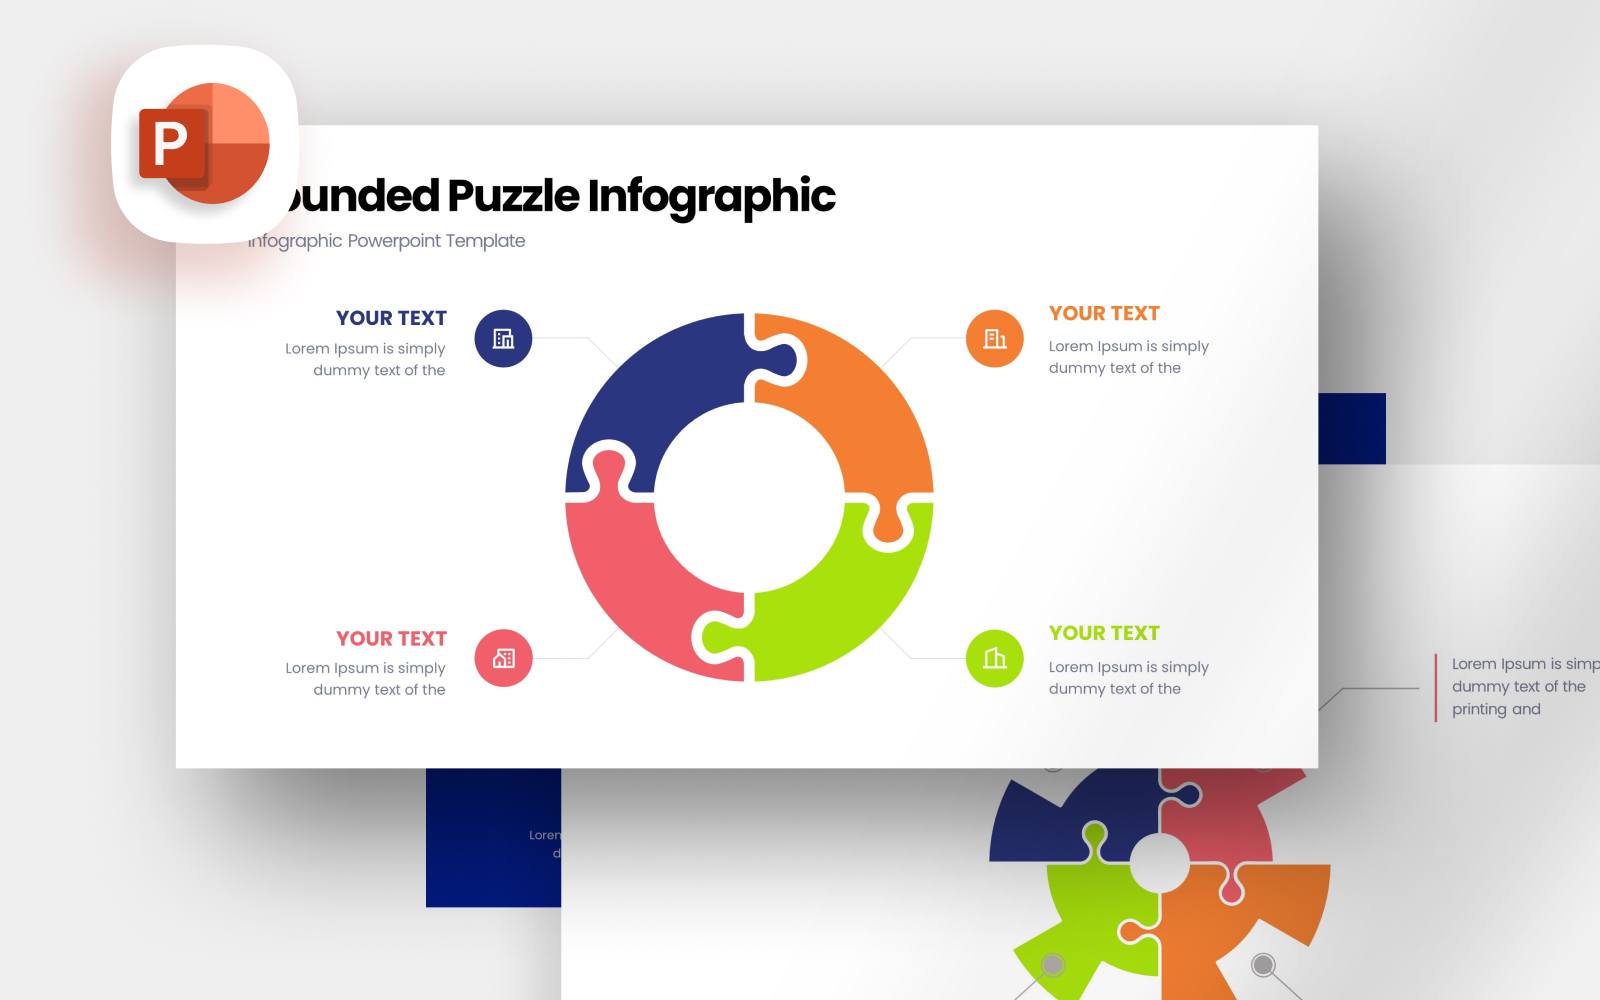 Rounded Puzzle Infographic Presentation Template